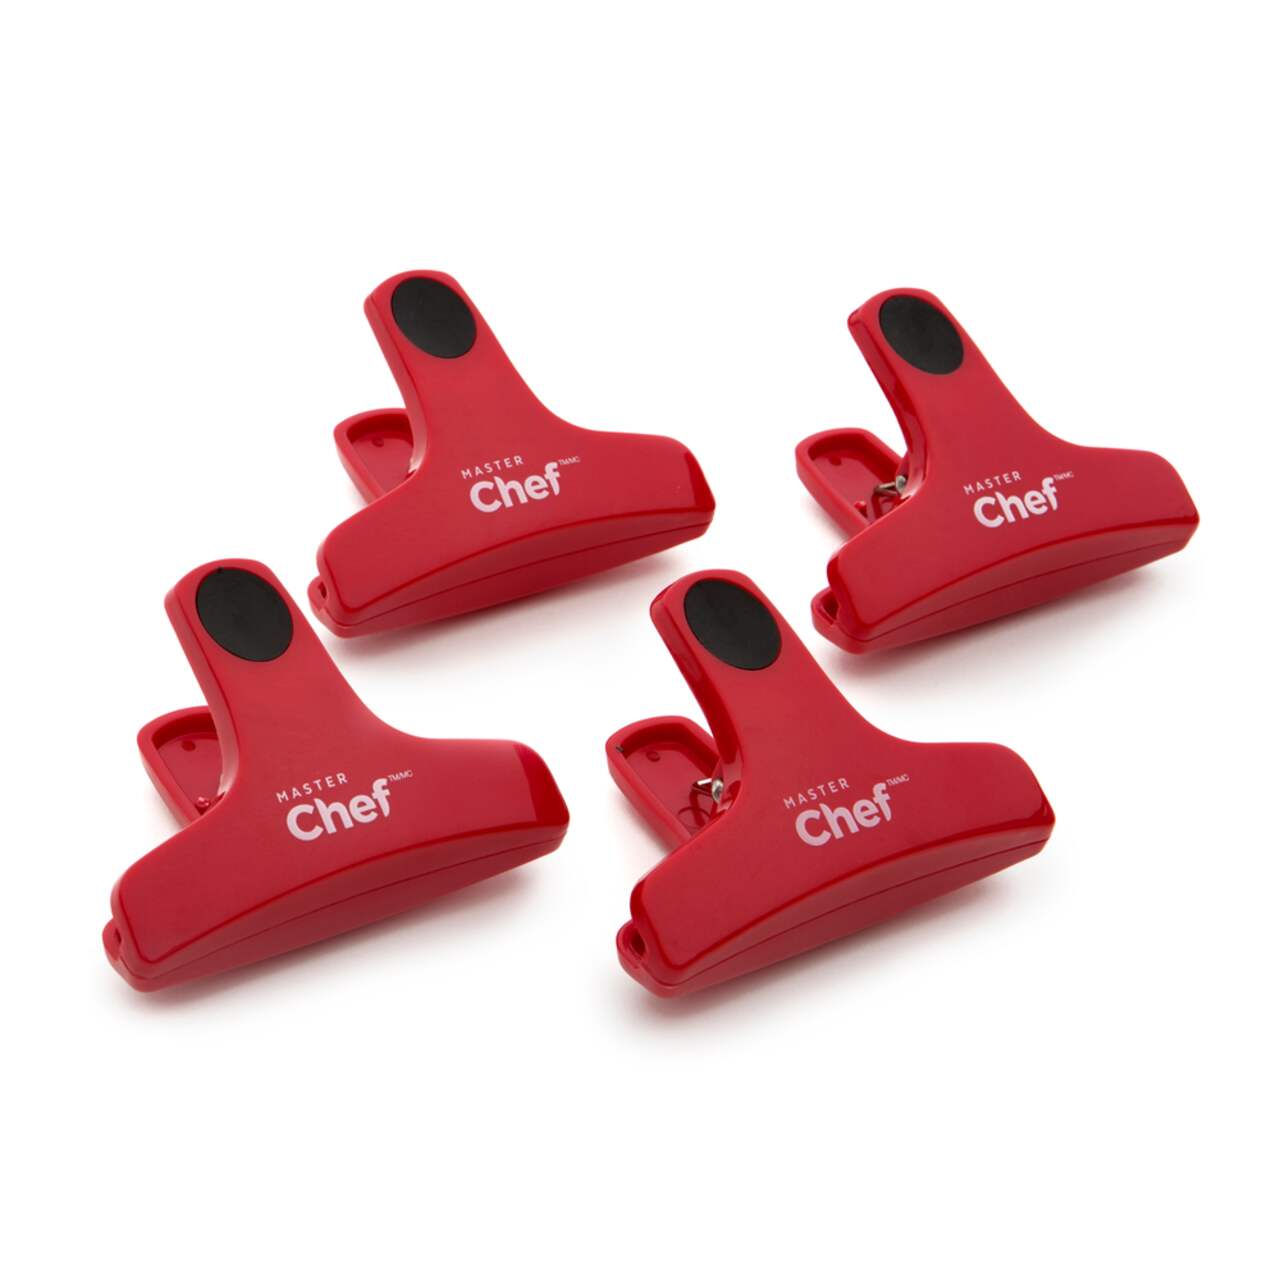 https://media-www.canadiantire.ca/product/living/kitchen/kitchen-tools-thermometers/1424505/masterchef-4-pack-bag-clips-red-adfc291e-3f8a-448d-96e5-f7495ce63f73.png?imdensity=1&imwidth=640&impolicy=mZoom